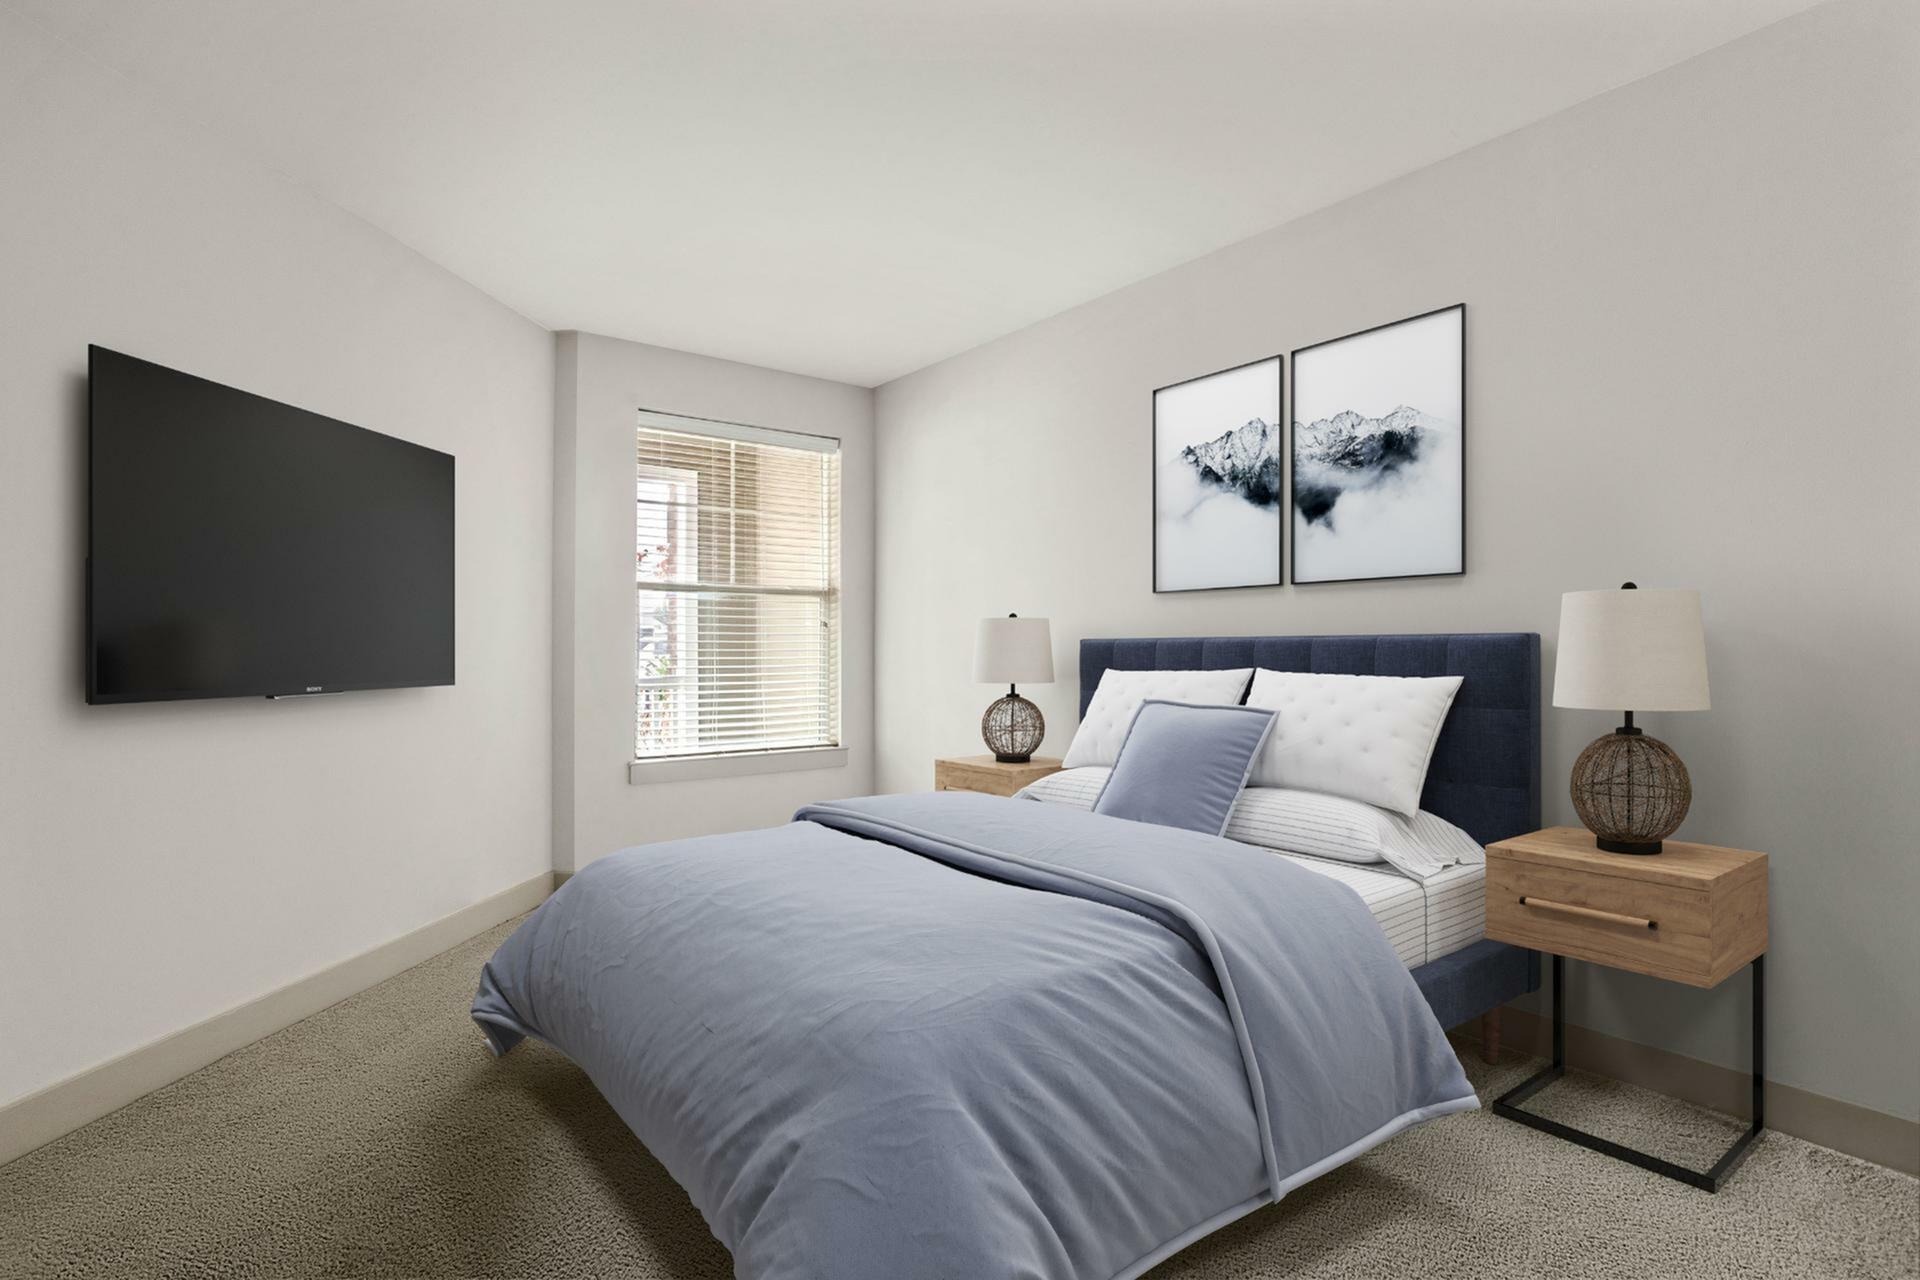 Bedroom | Apartments in Charlotte, NC | CityPark View